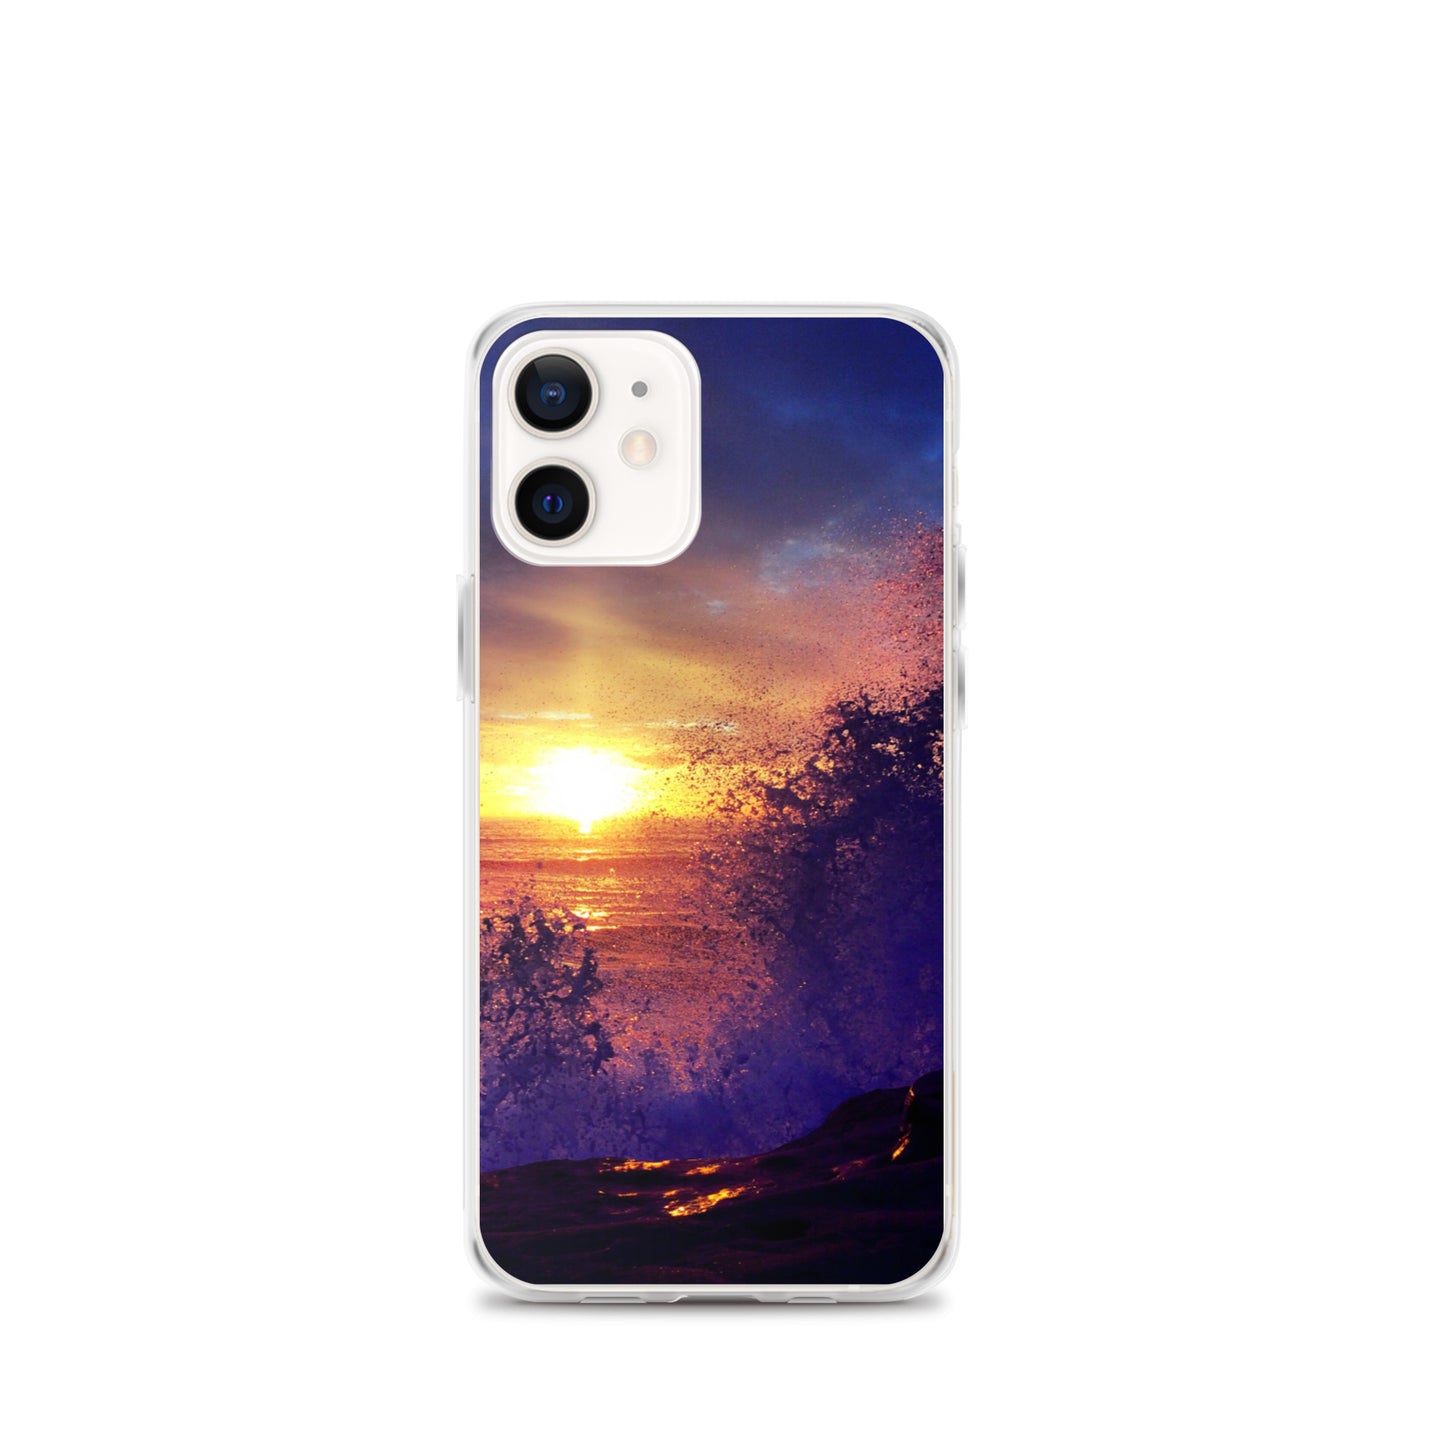 That Sunset Tho (iPhone Case) - Comfortable Culture - iPhone 12 mini - Mobile Phone Cases - Comfortable Culture